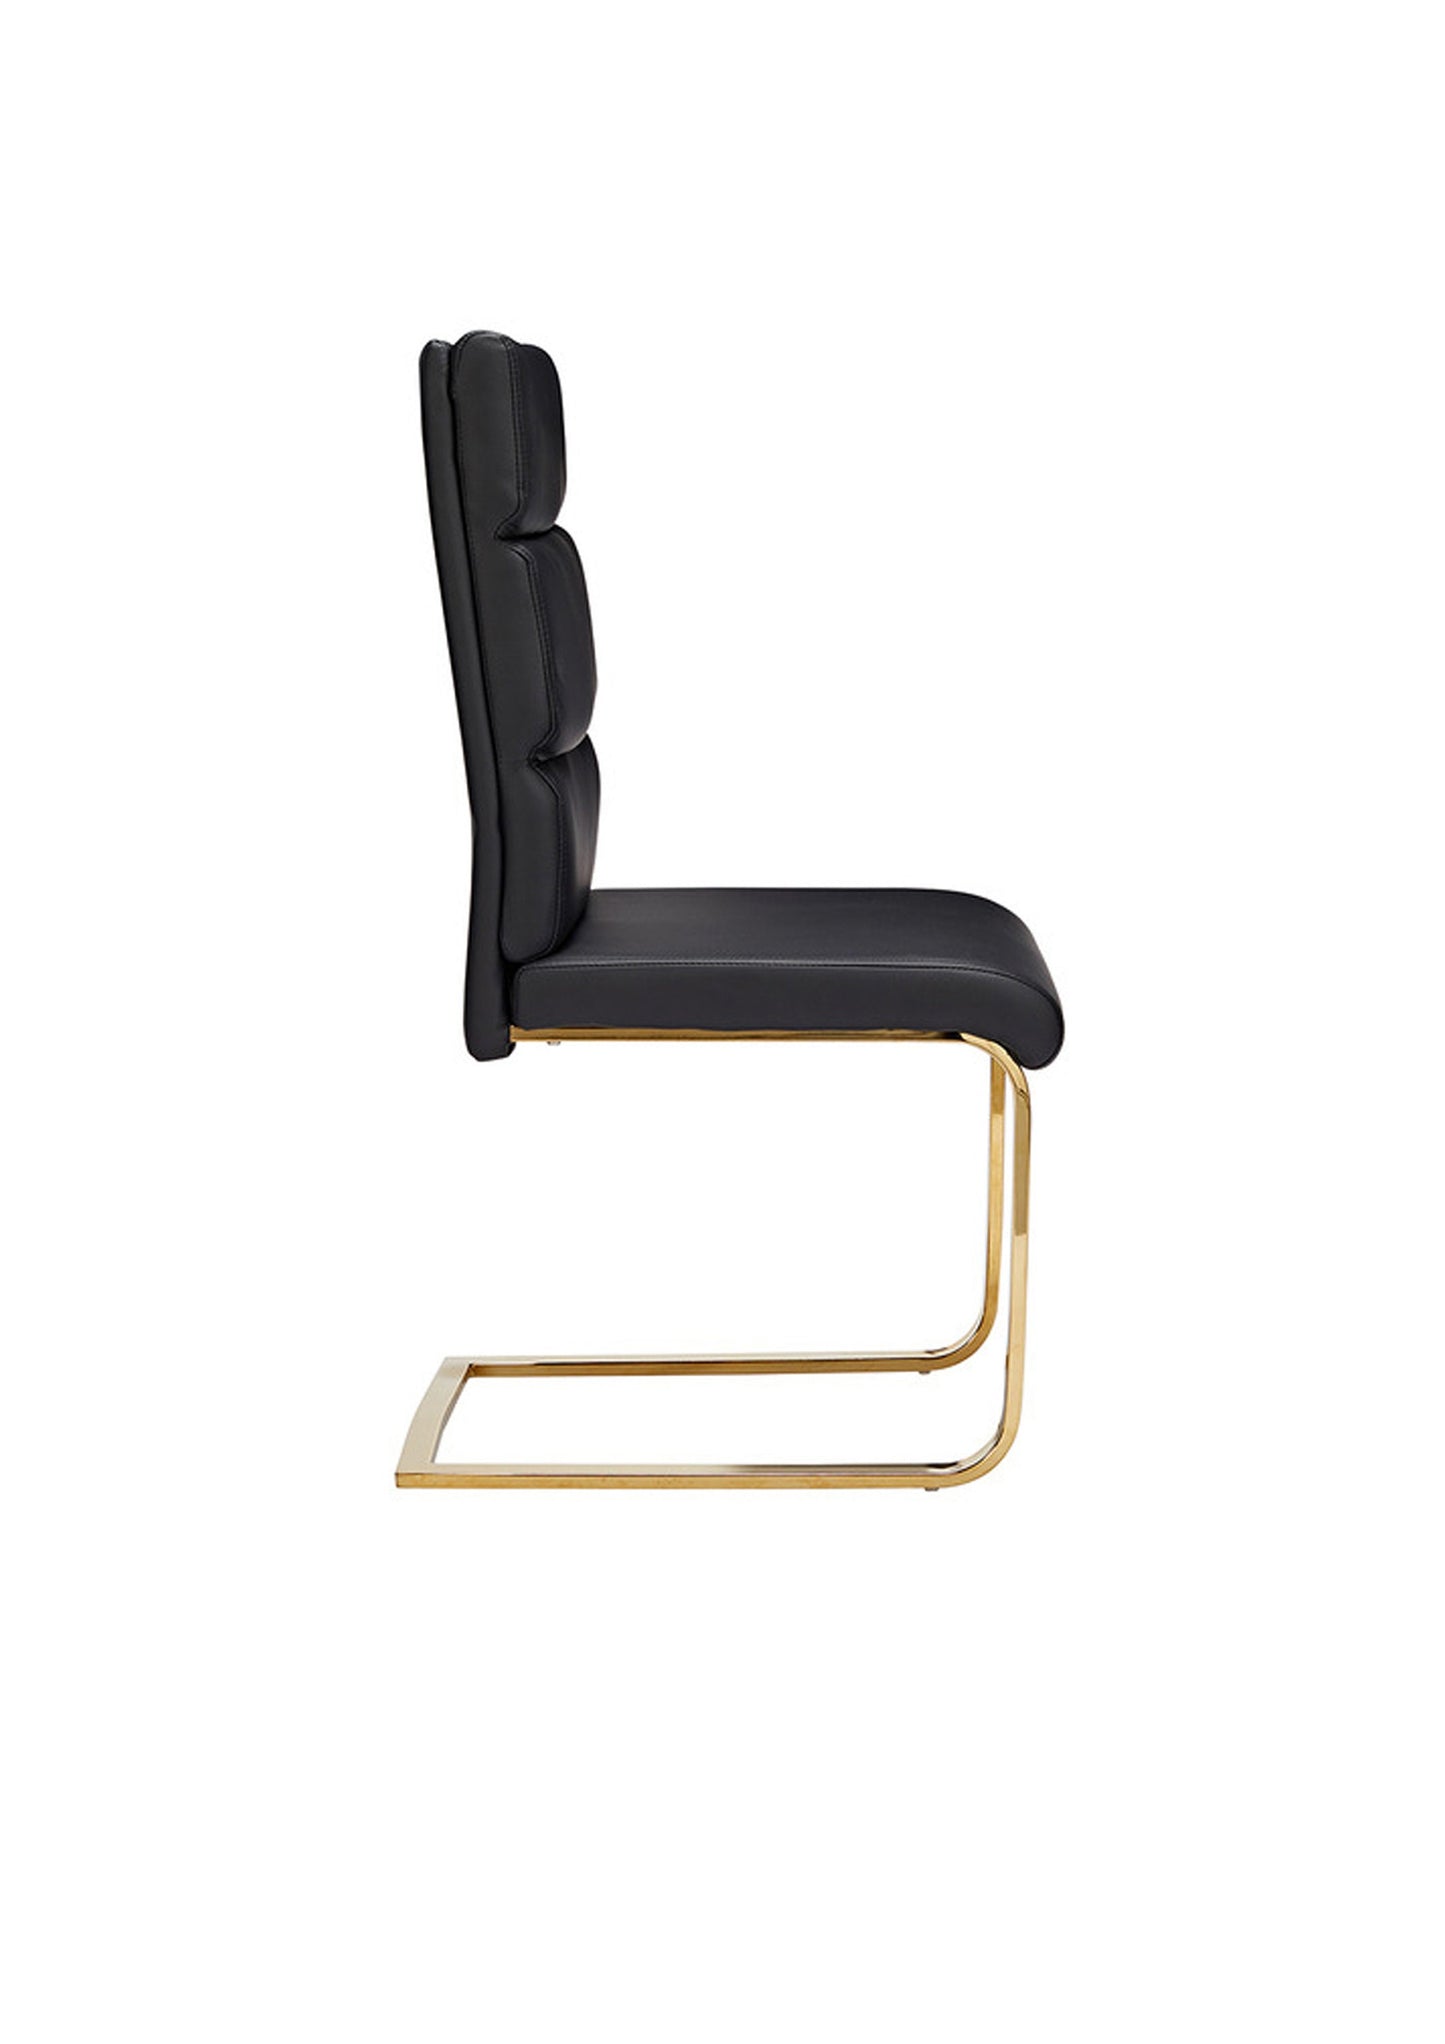 NEW Luxury Stylish Dining / Office chair in Faux Leather White or Black with Gold base - Pack of 2